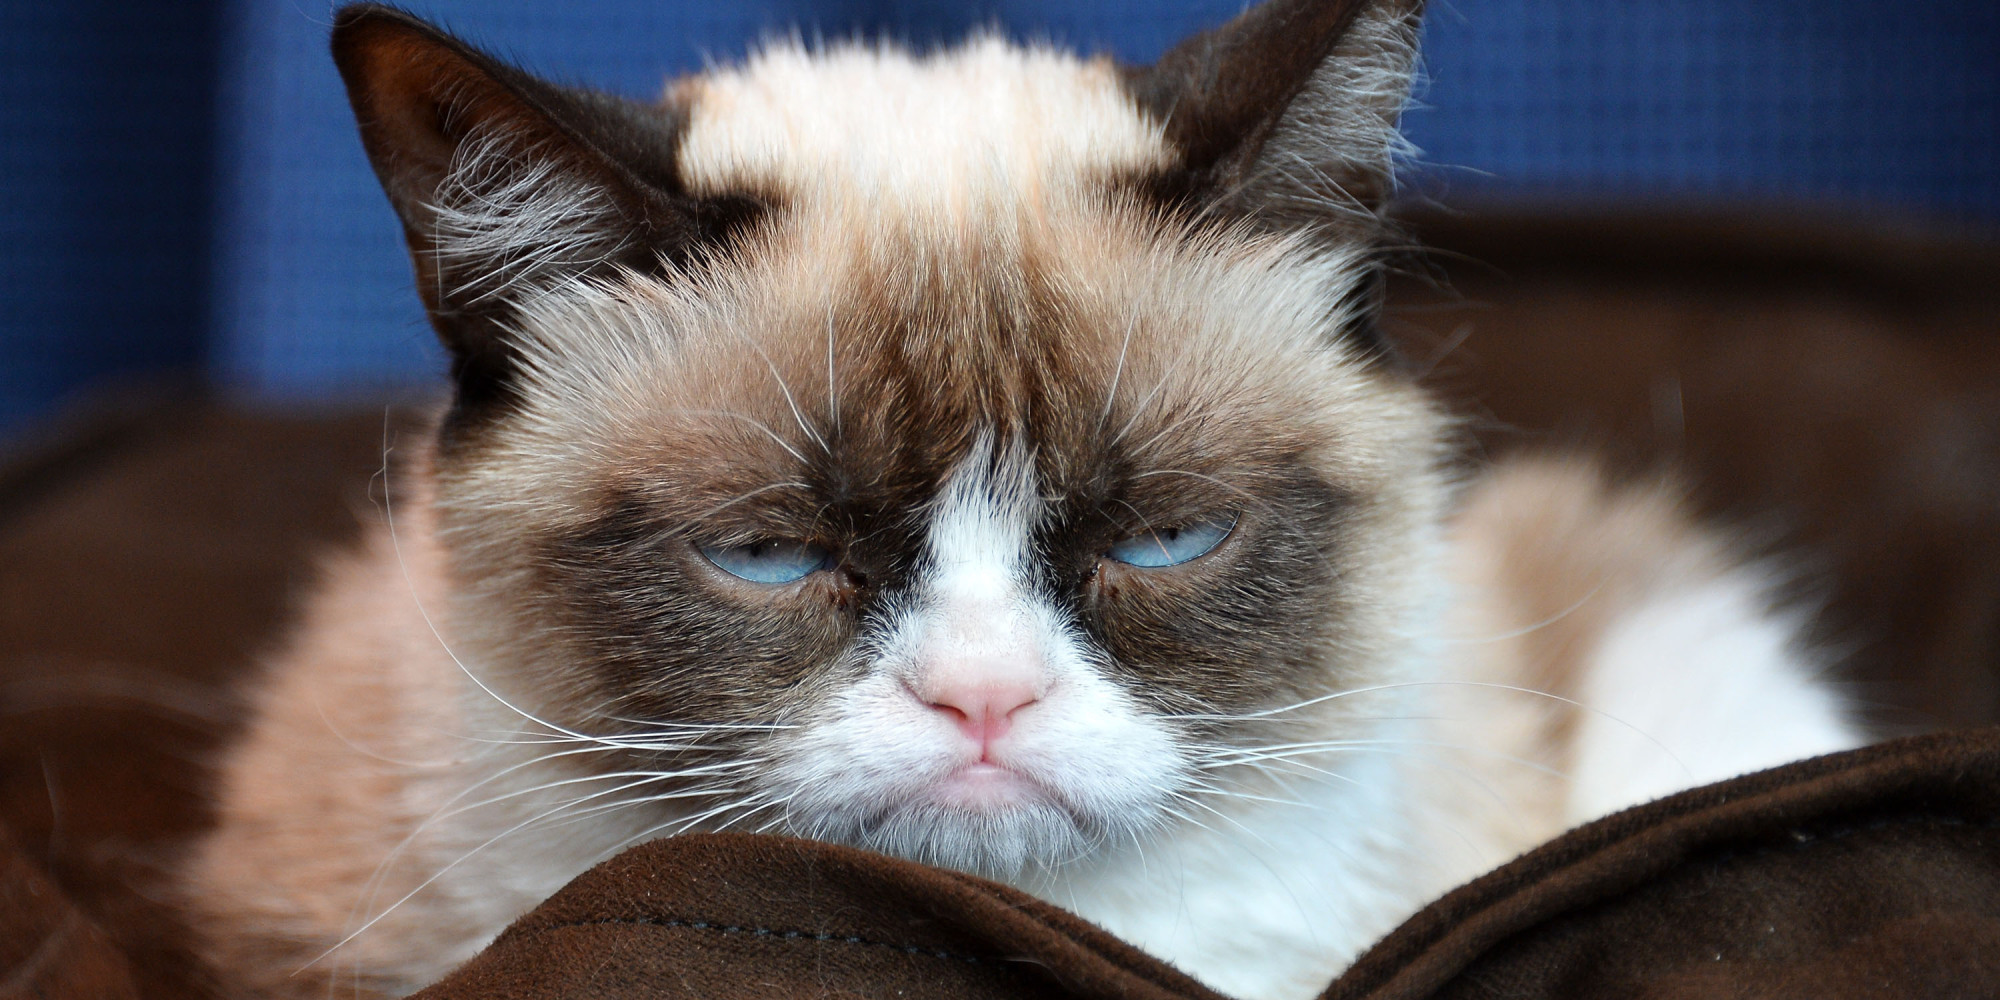 Petting Stressful For Some Cats, New Study Suggests (VIDEO) | HuffPost